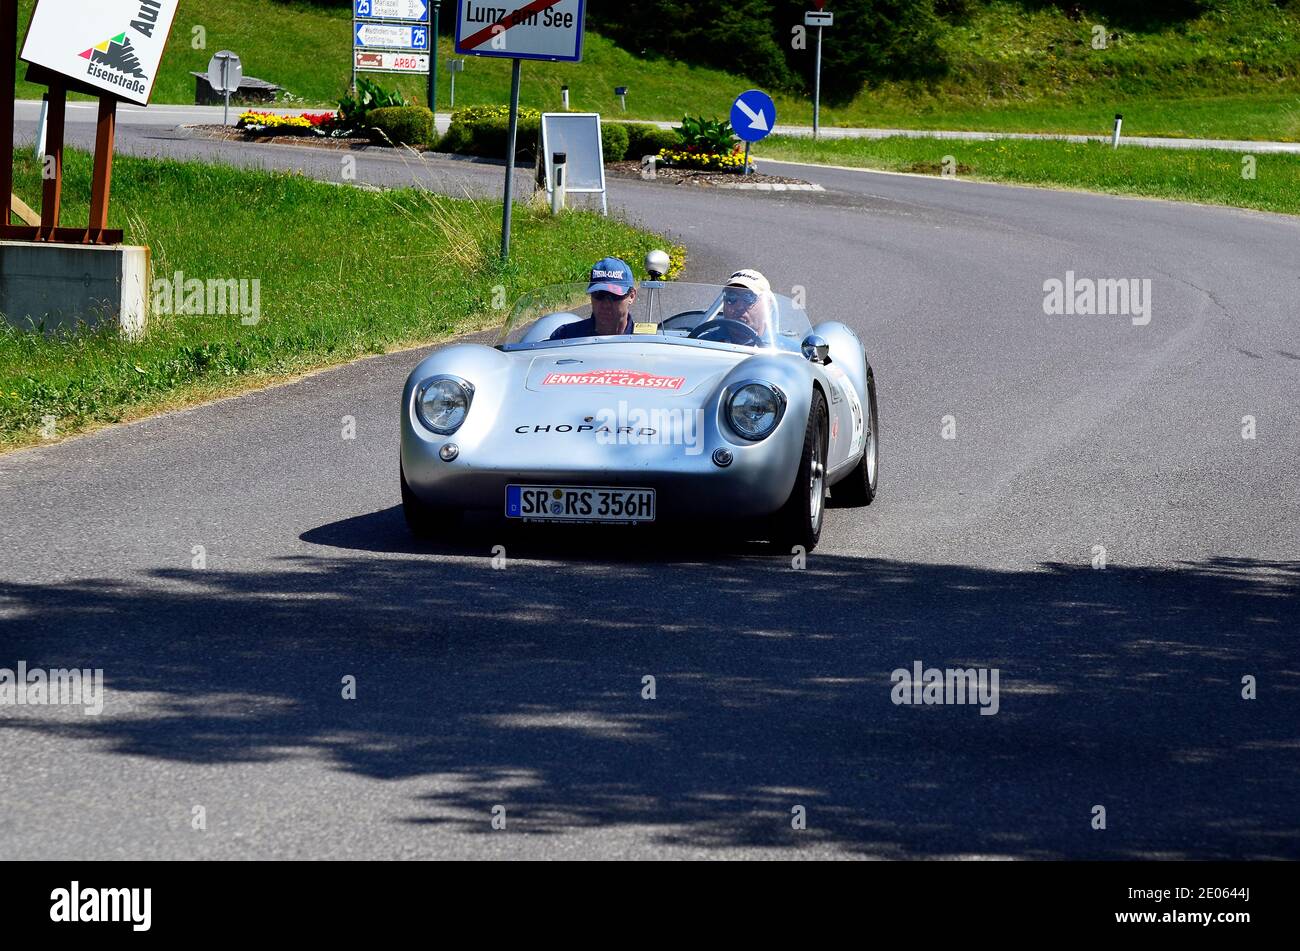 Lunz am See, Austria - July 19, 2013: Porsche Spyder on special stage by International Ennstal Classic 2013, a yearly tournament through Austria for v Stock Photo